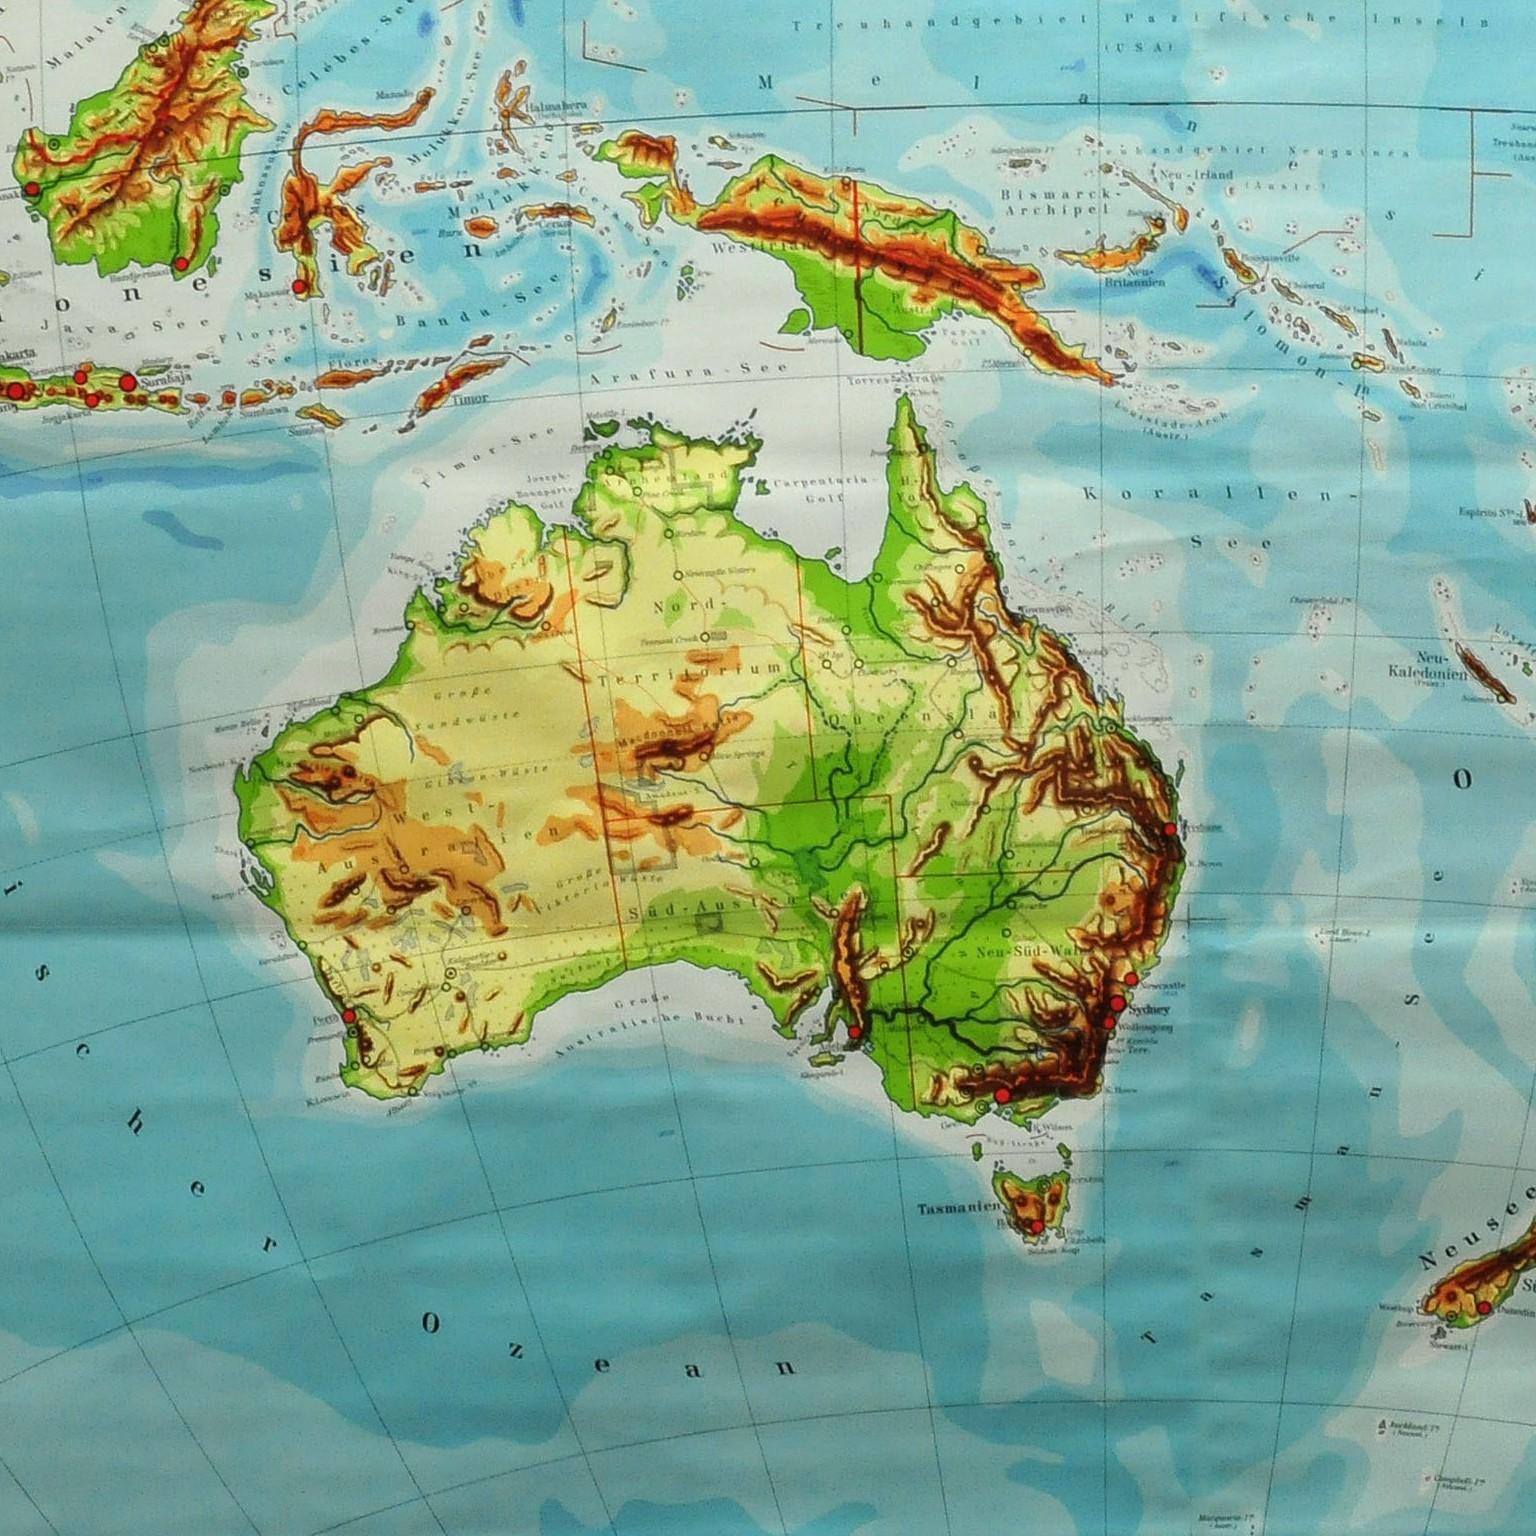 The wall map shows Australia and Oceania. It was published by Westermann-Schulwandkarten. Used as teaching material in German schools. Colorful print on paper reinforced with canvas.
Measurements:
Width 206.50cm (81.30 inch)
Height 169.50 cm